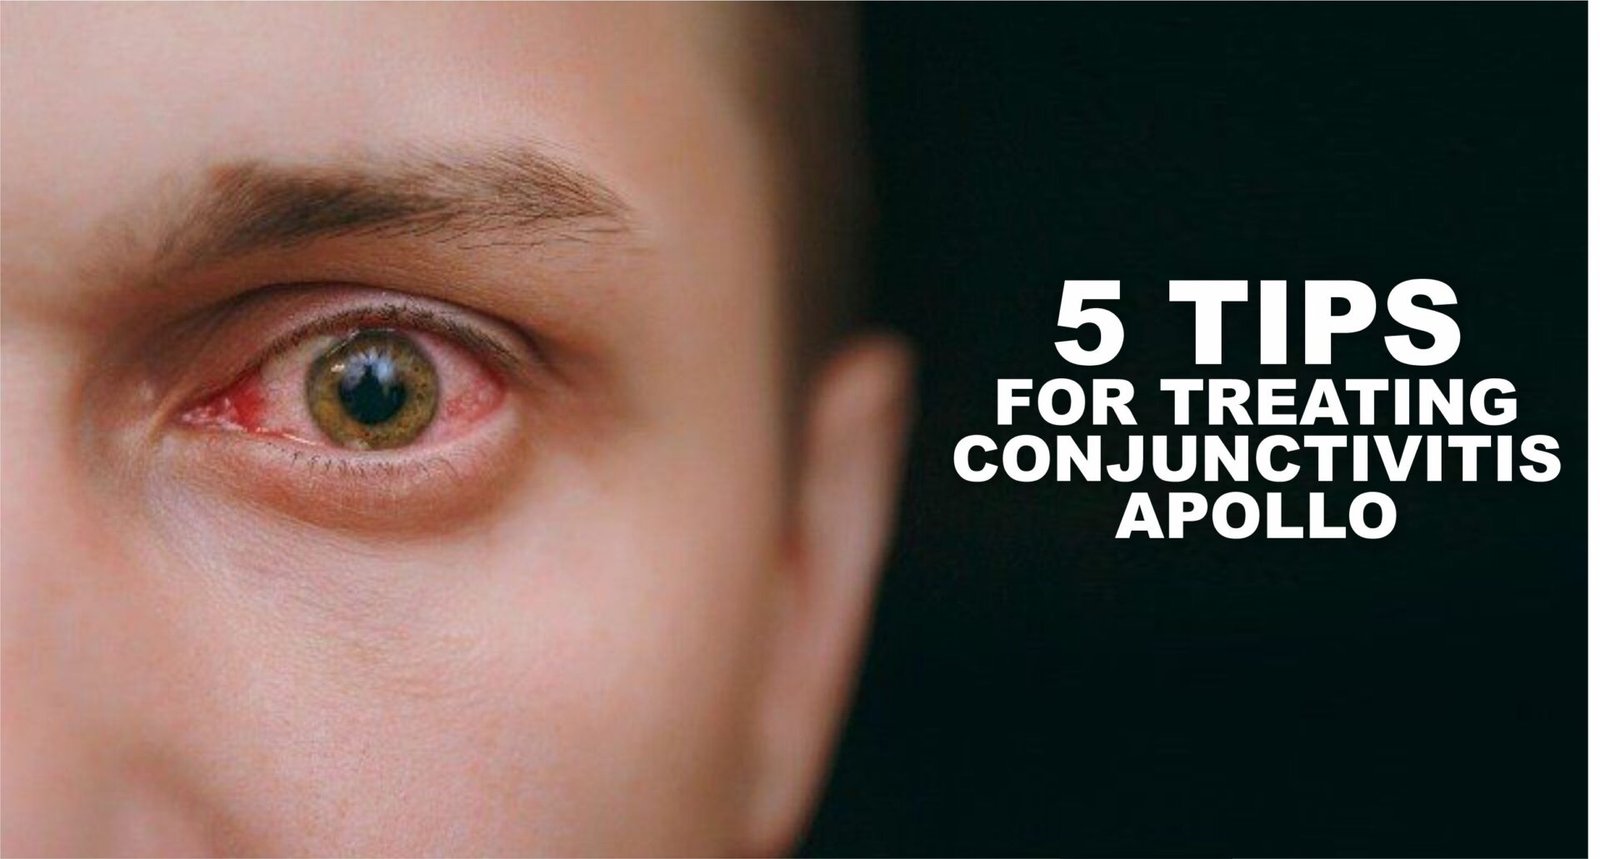 5 Tips For Treating Conjunctivitis Apollo